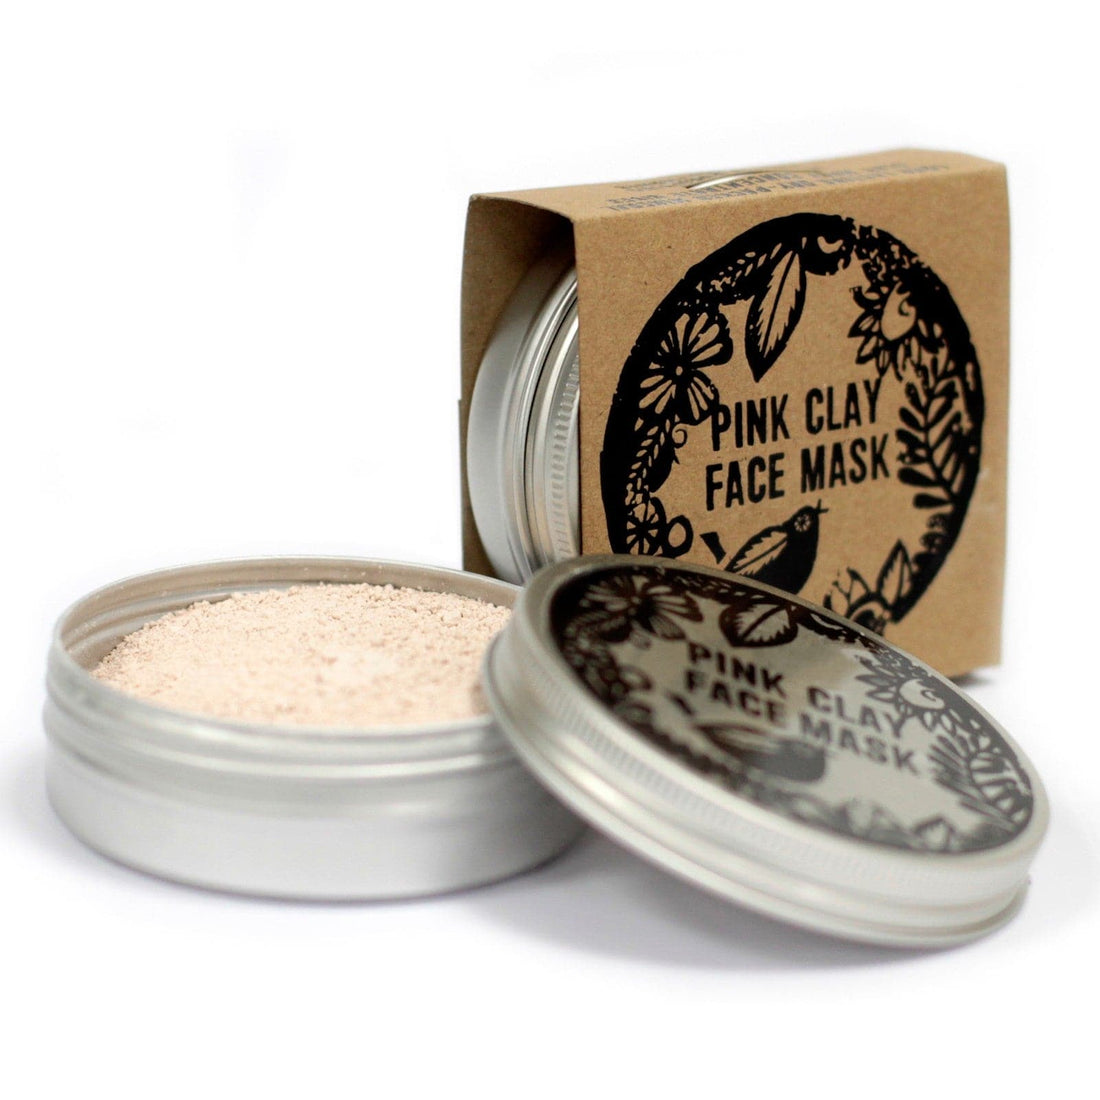 Pink Clay Face Mask 50g - best price from Maltashopper.com ACFM-03DS